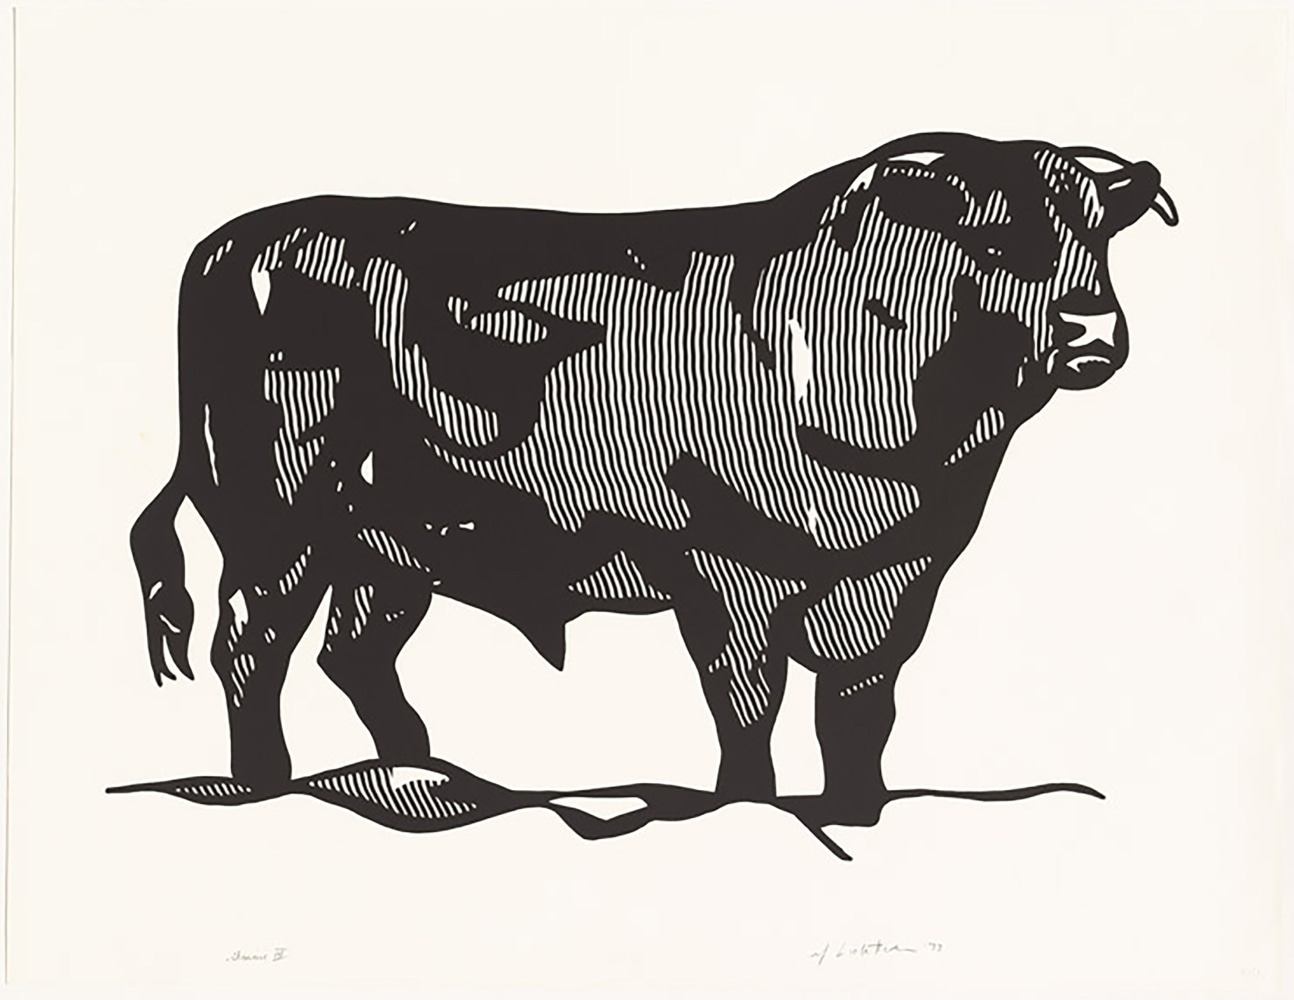 BULL I (from Bull Profile Series)
ROY LICHTENSTEIN, 1973

Line-cut on Arjomari Paper with wide margins
20 3/10&amp;rdquo; x 28 7/10&amp;rdquo;
Edition 100
$20,000.00

Published by Gemini G.E.L

INQUIRE